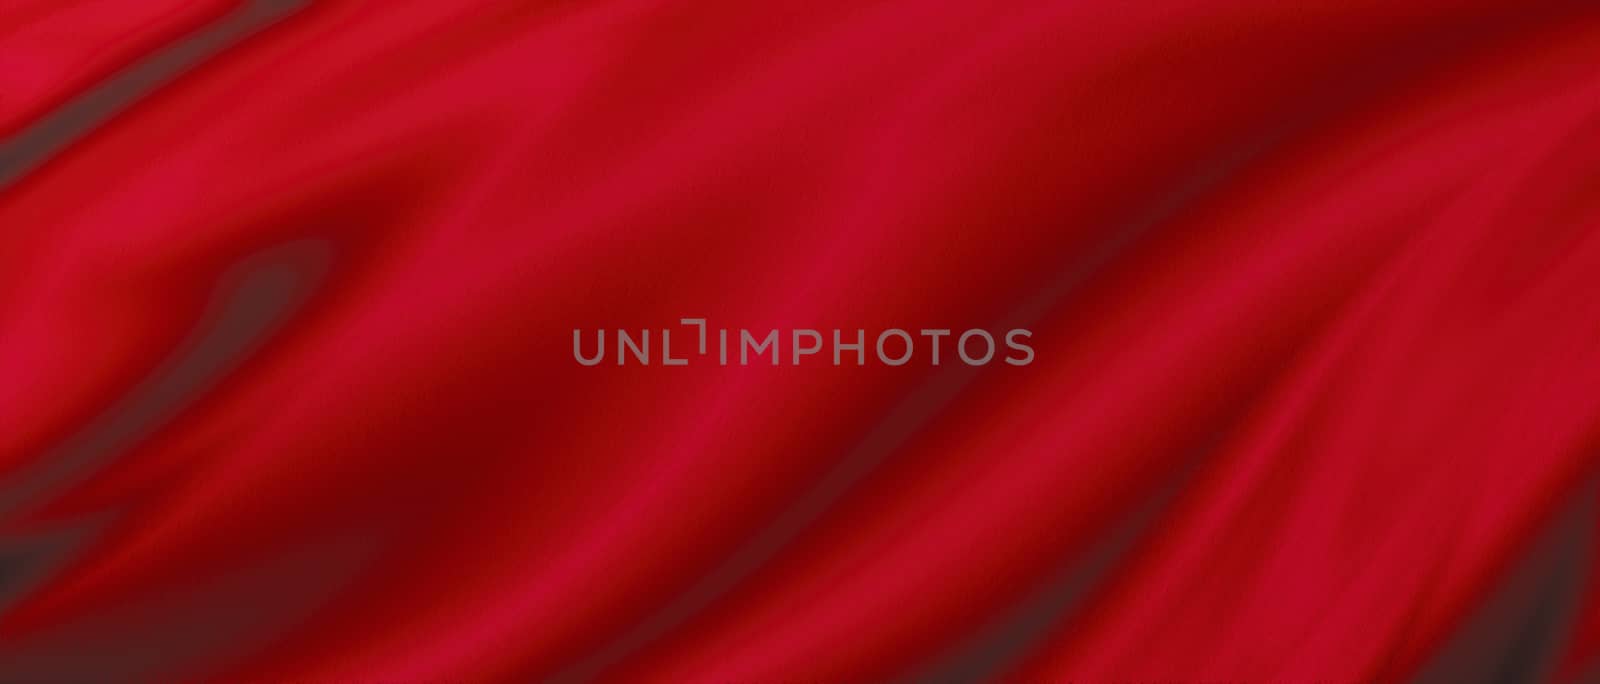 Red luxury fabric background with copy space